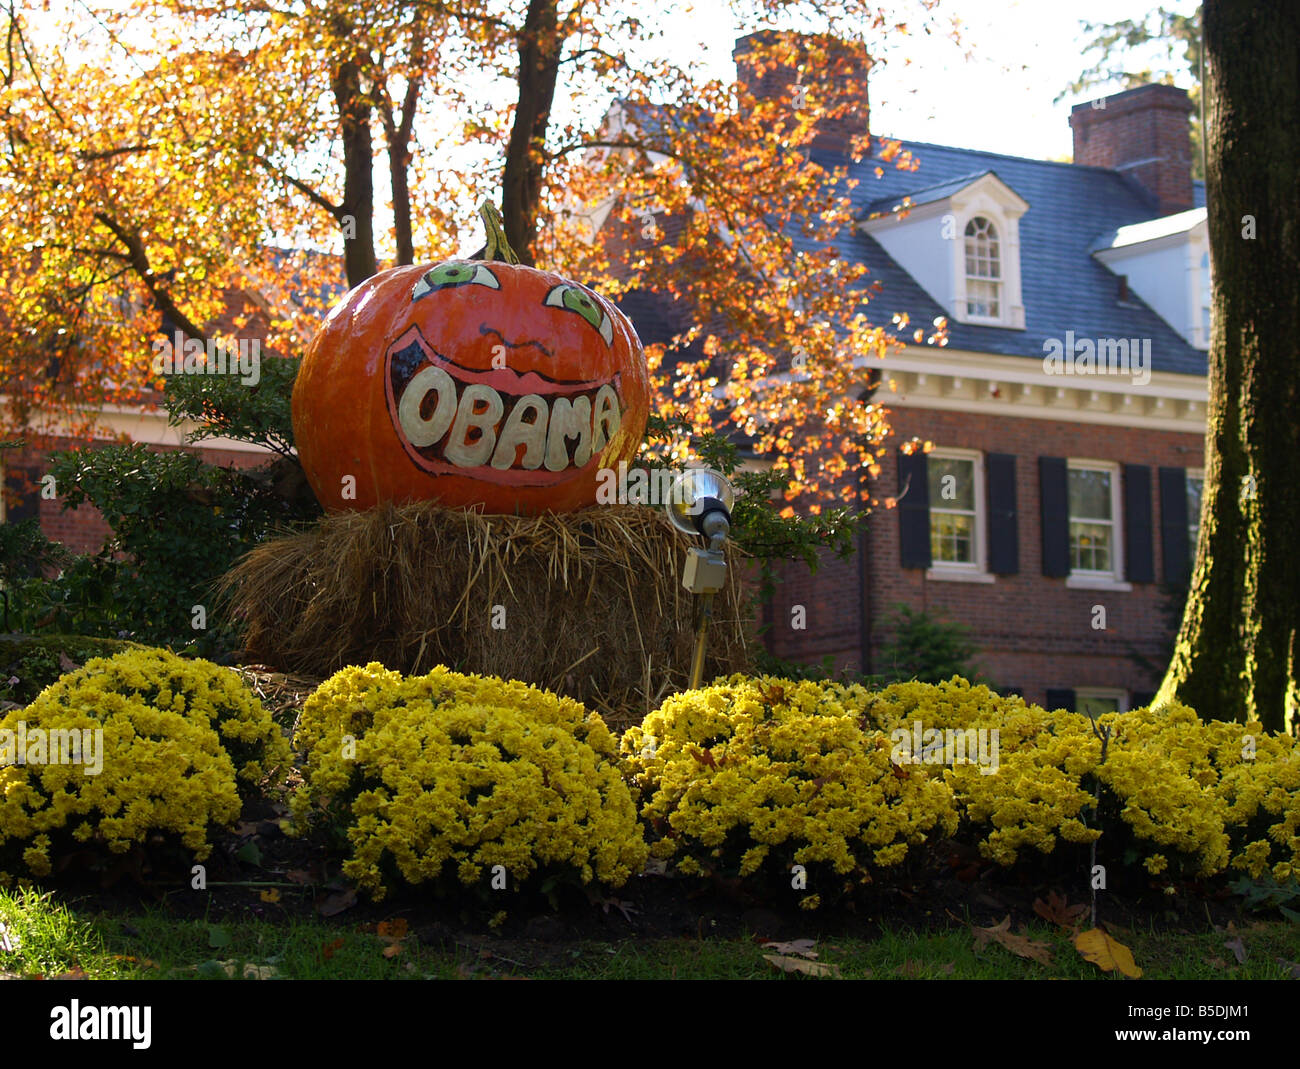 Autumn decorations incorporate support for Barack Obama. Stock Photo